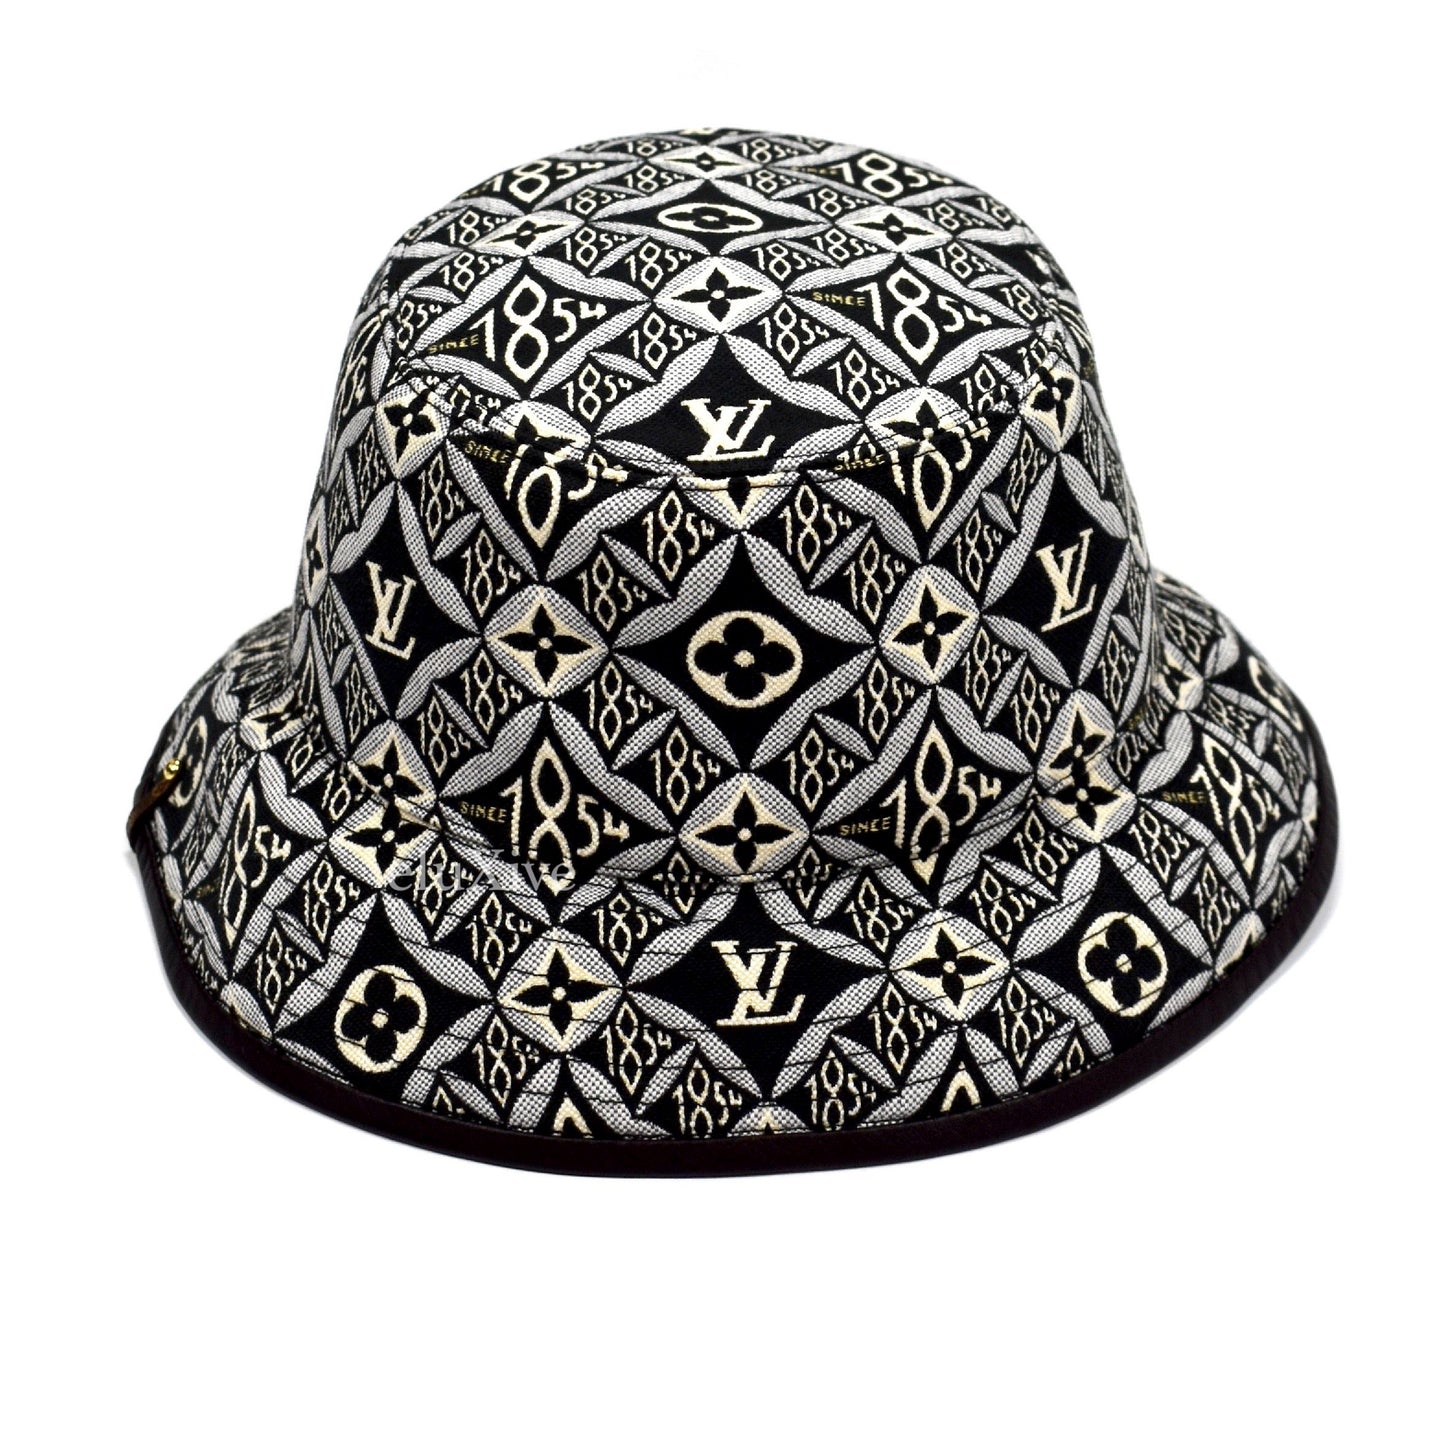 Louis Vuitton Black and White Since 1854 Bucket Hat